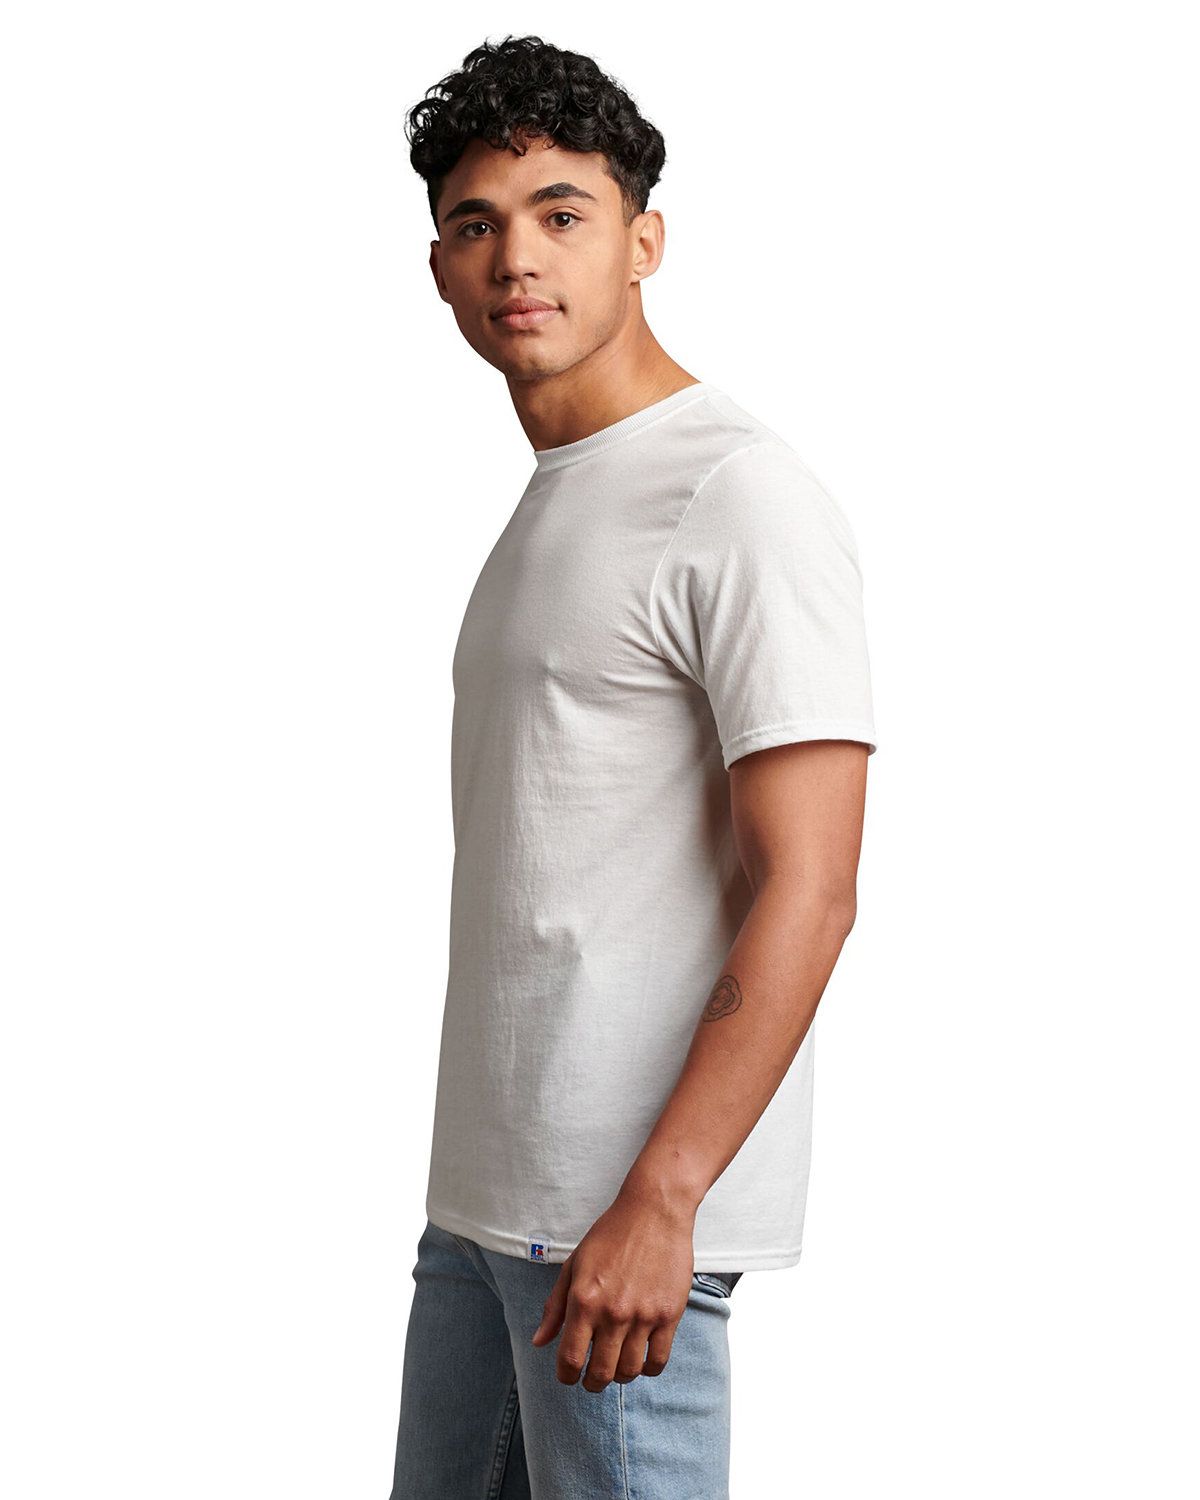 Russell Athletic Men's Top - White